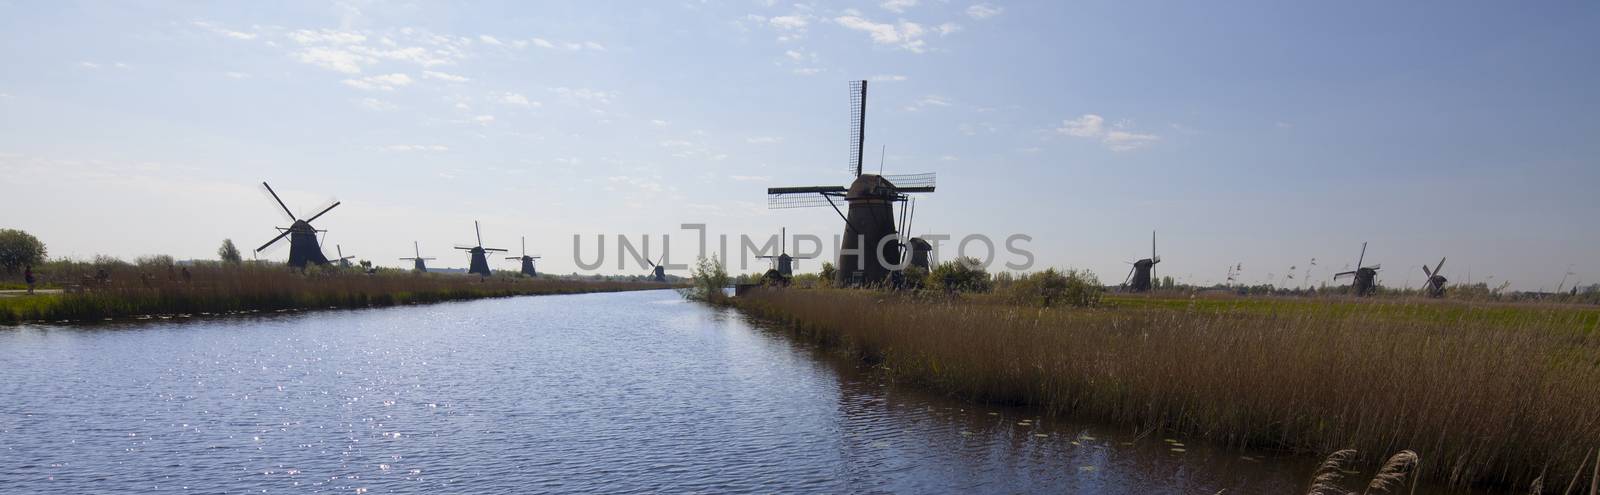 Old windmill in holland